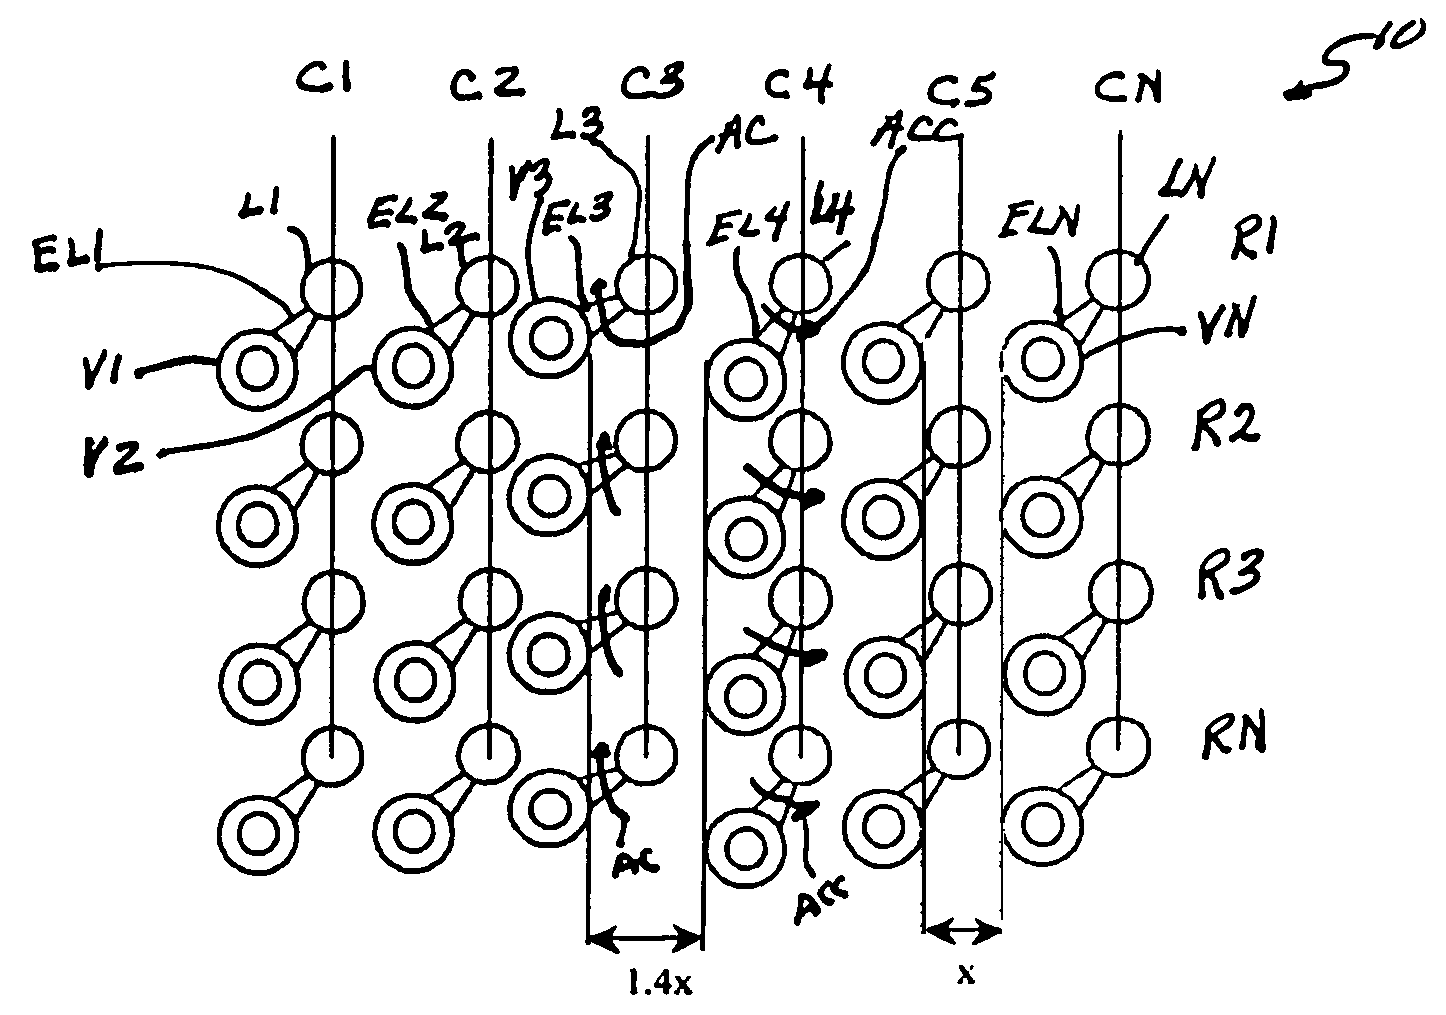 Off-width pitch for improved circuit card routing